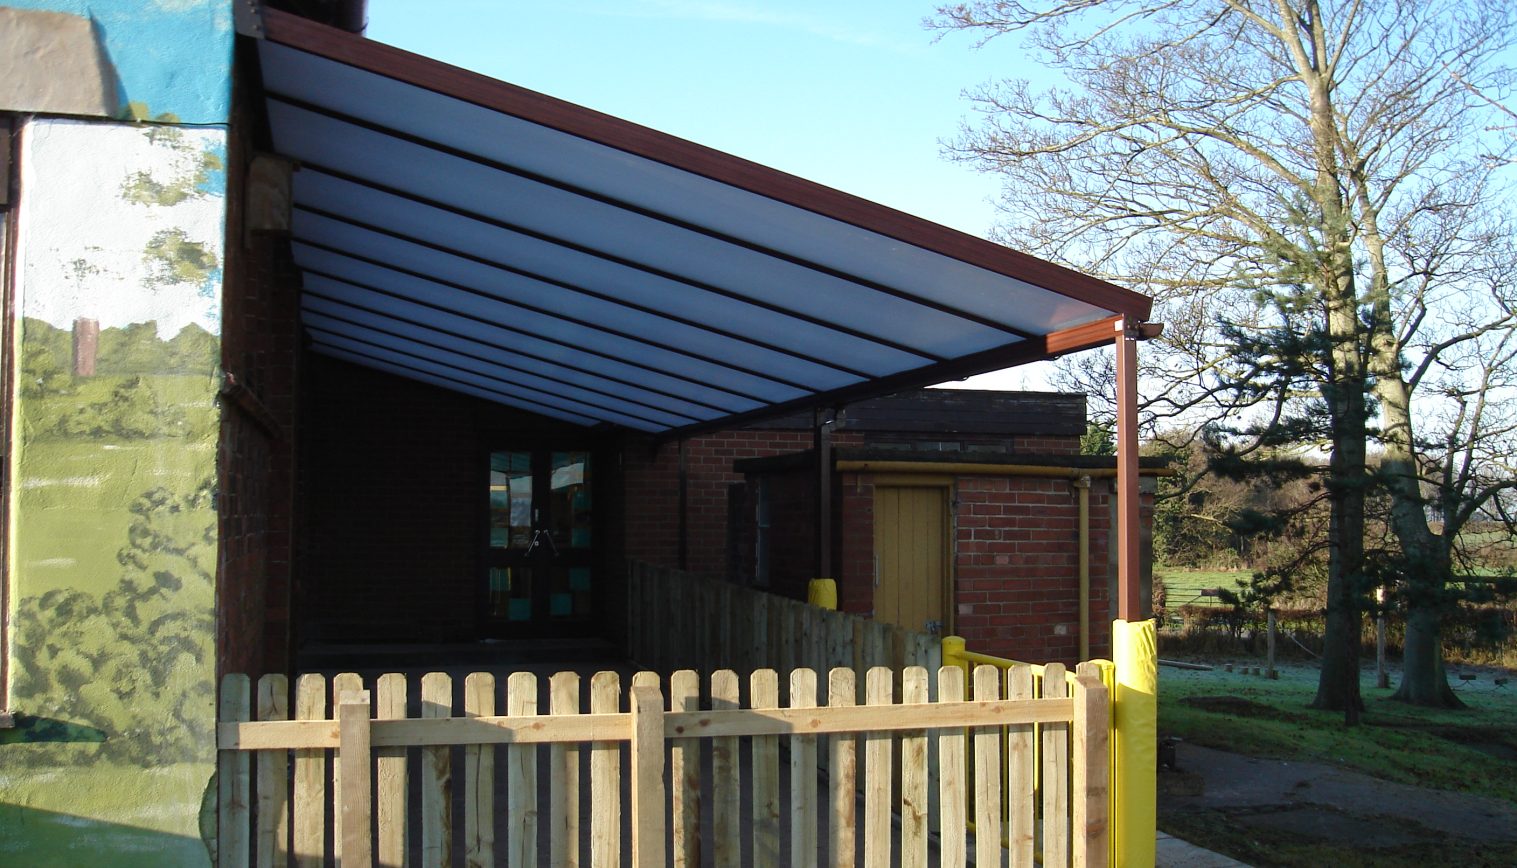 Winmarleigh C of E Primary School – Wall Mounted Canopy